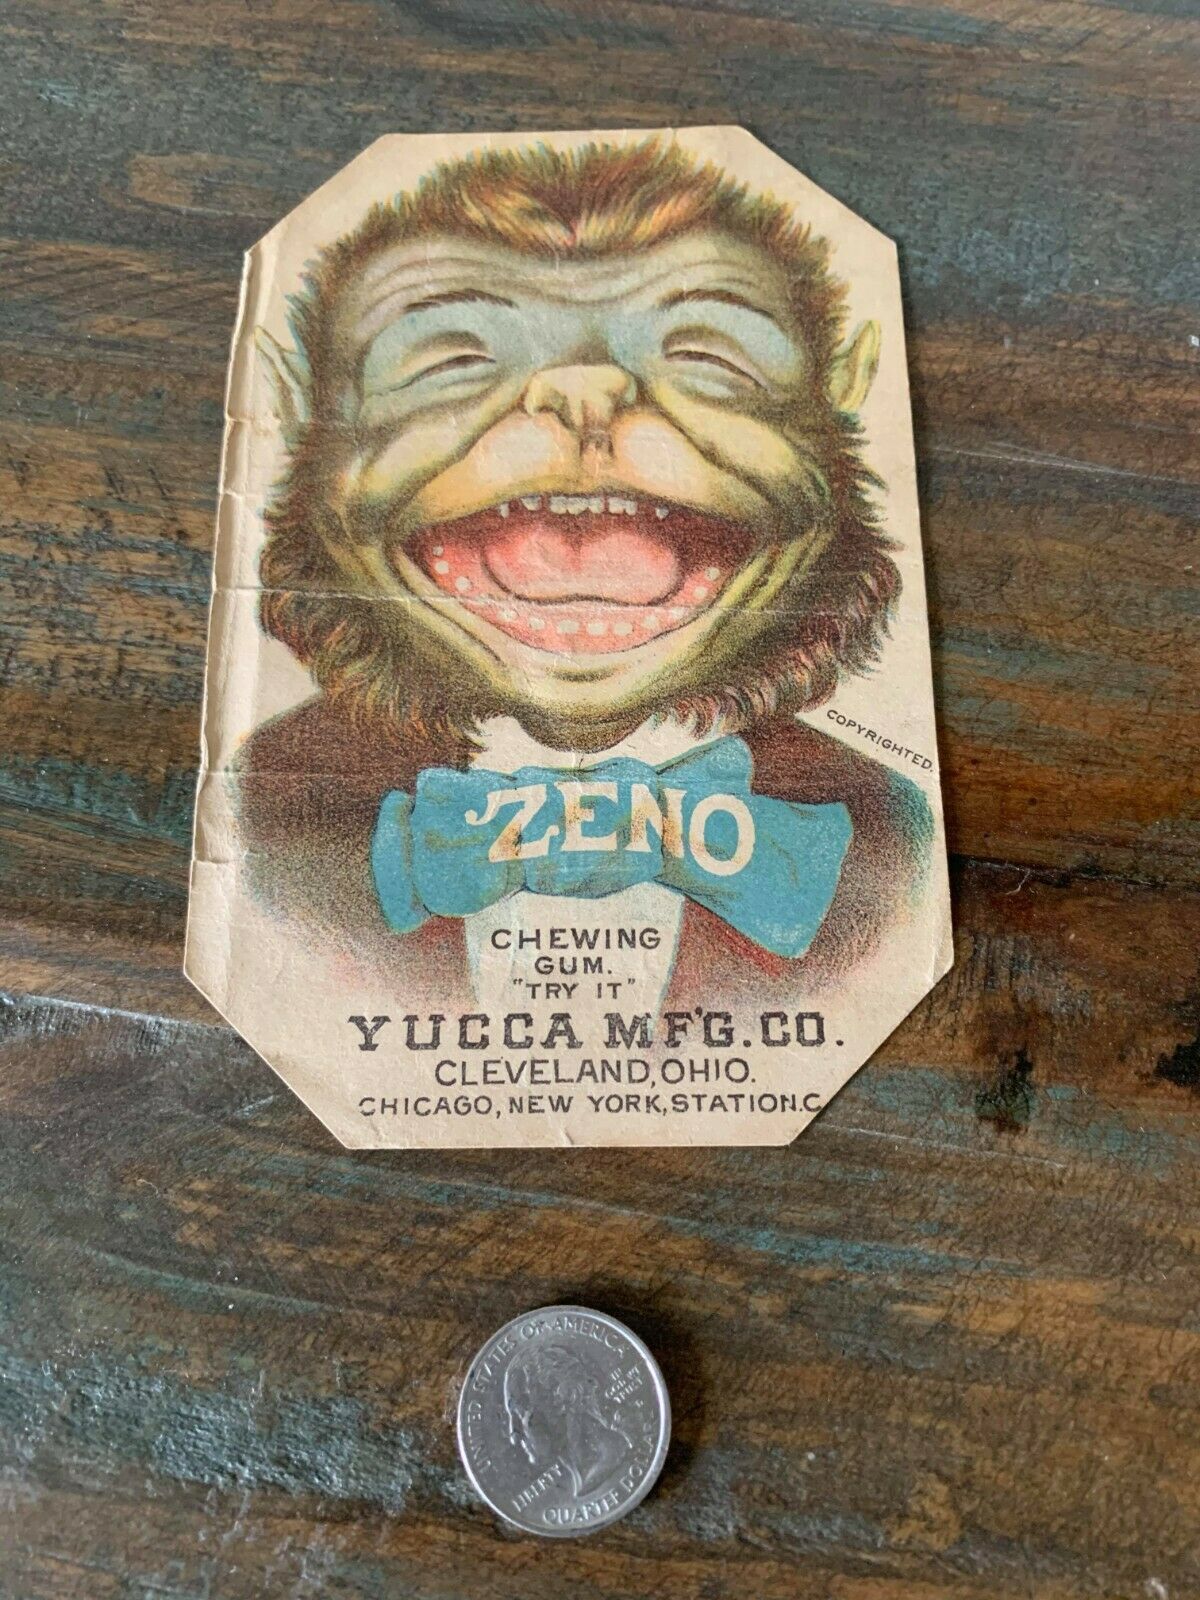 Antique Zeno Chewing Gum Paper Advertising Card - Yucca Mfg. Co